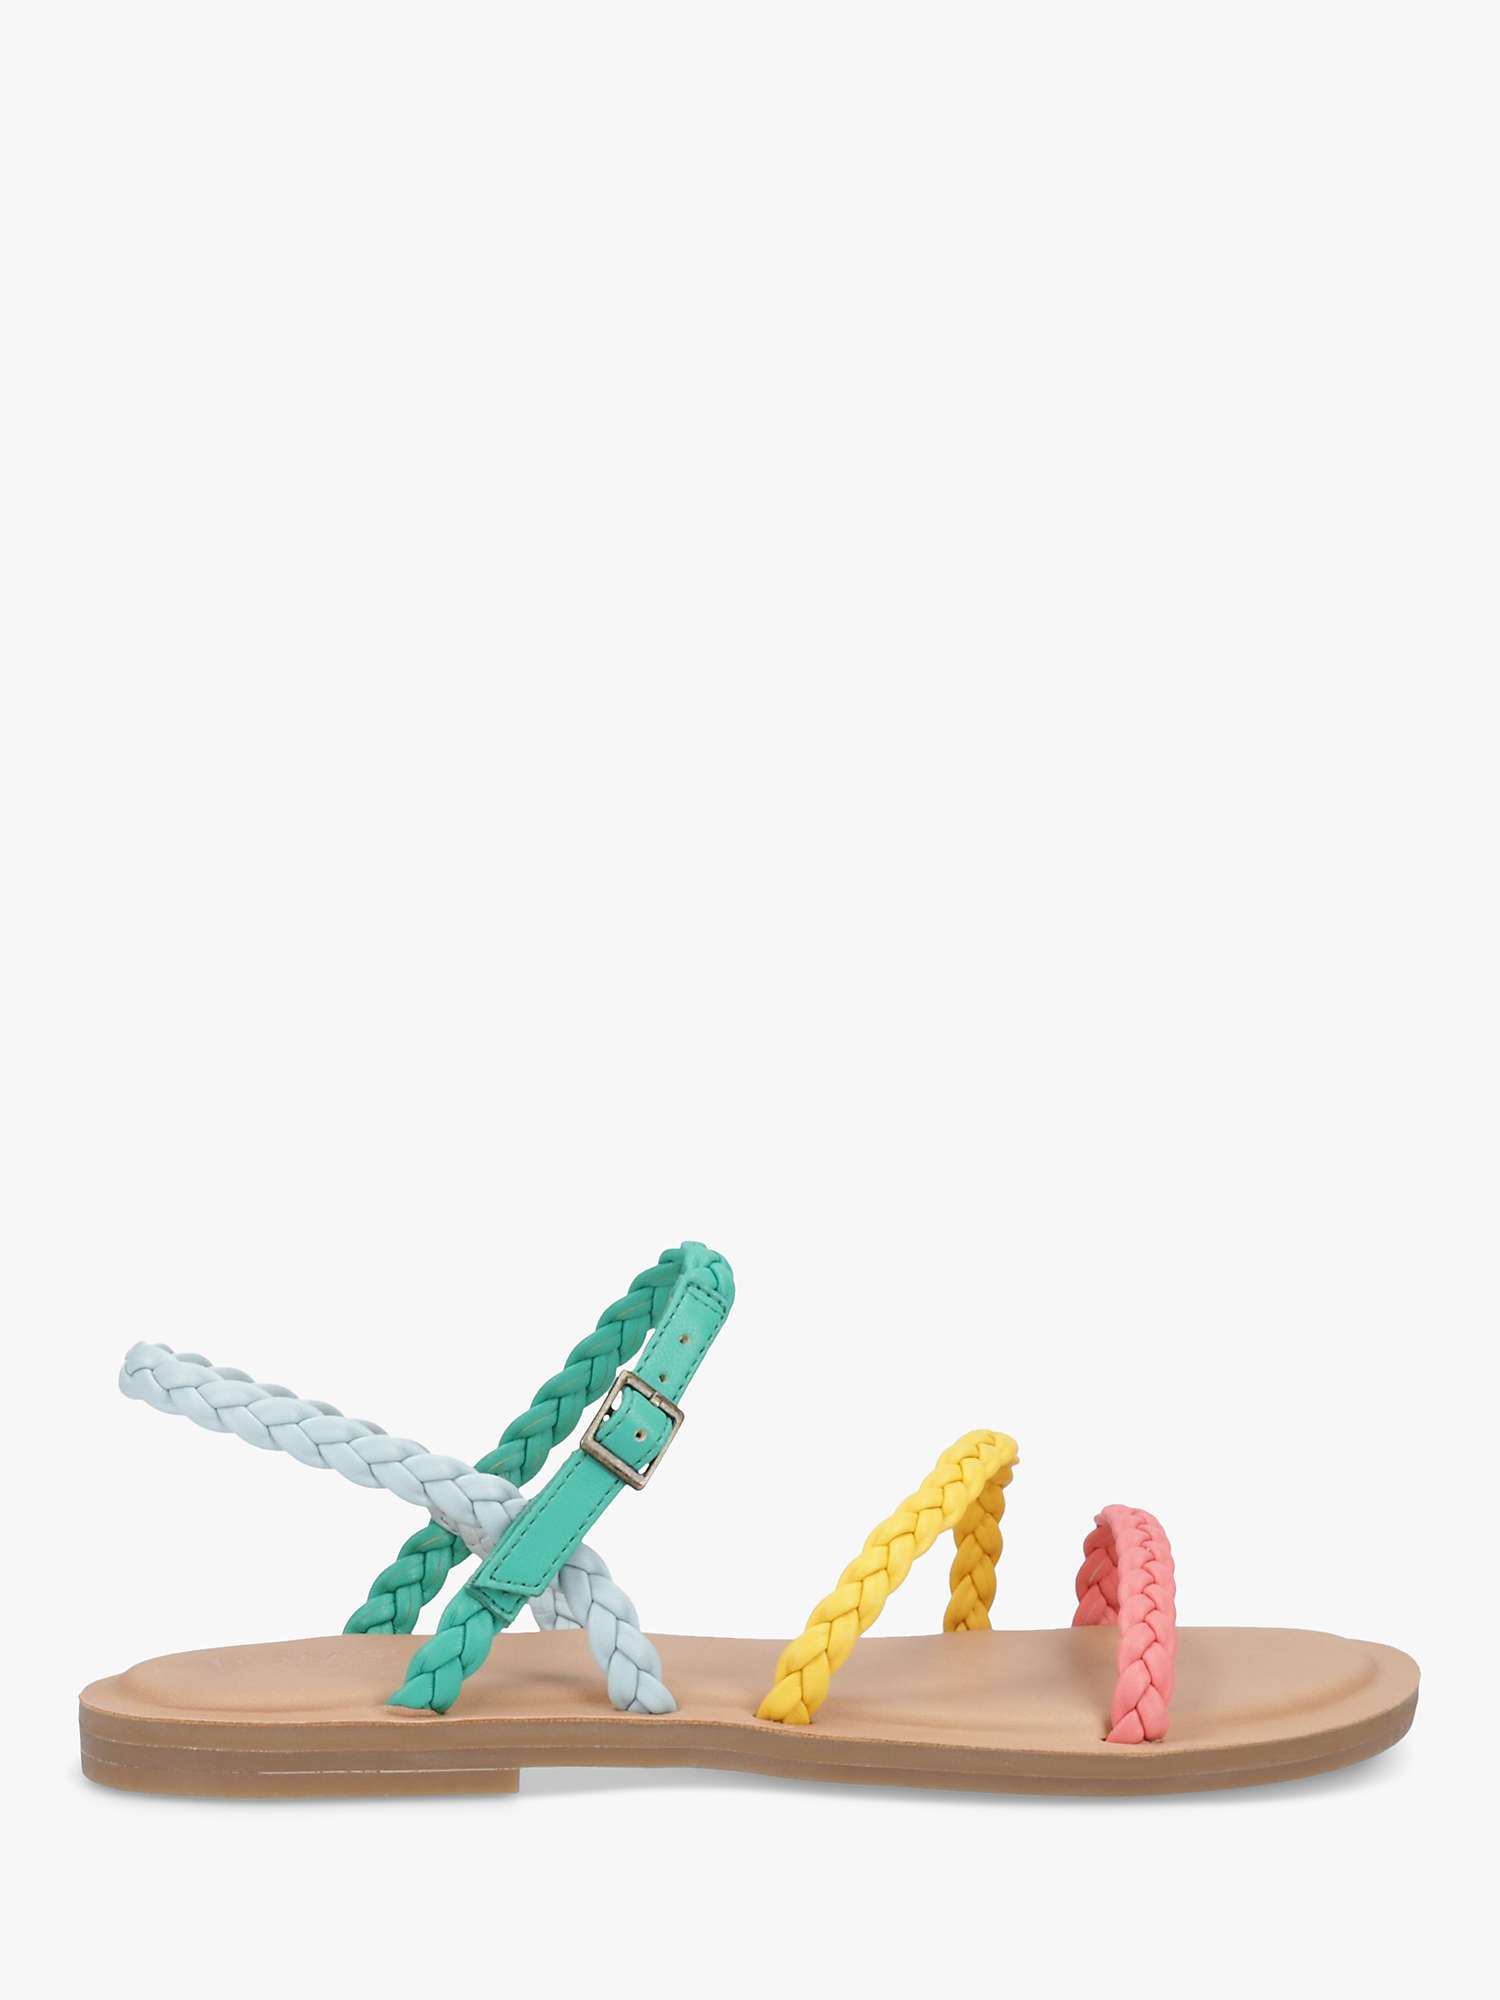 Buy TOMS Kira Strappy Sandals, Multicoloured Online at johnlewis.com